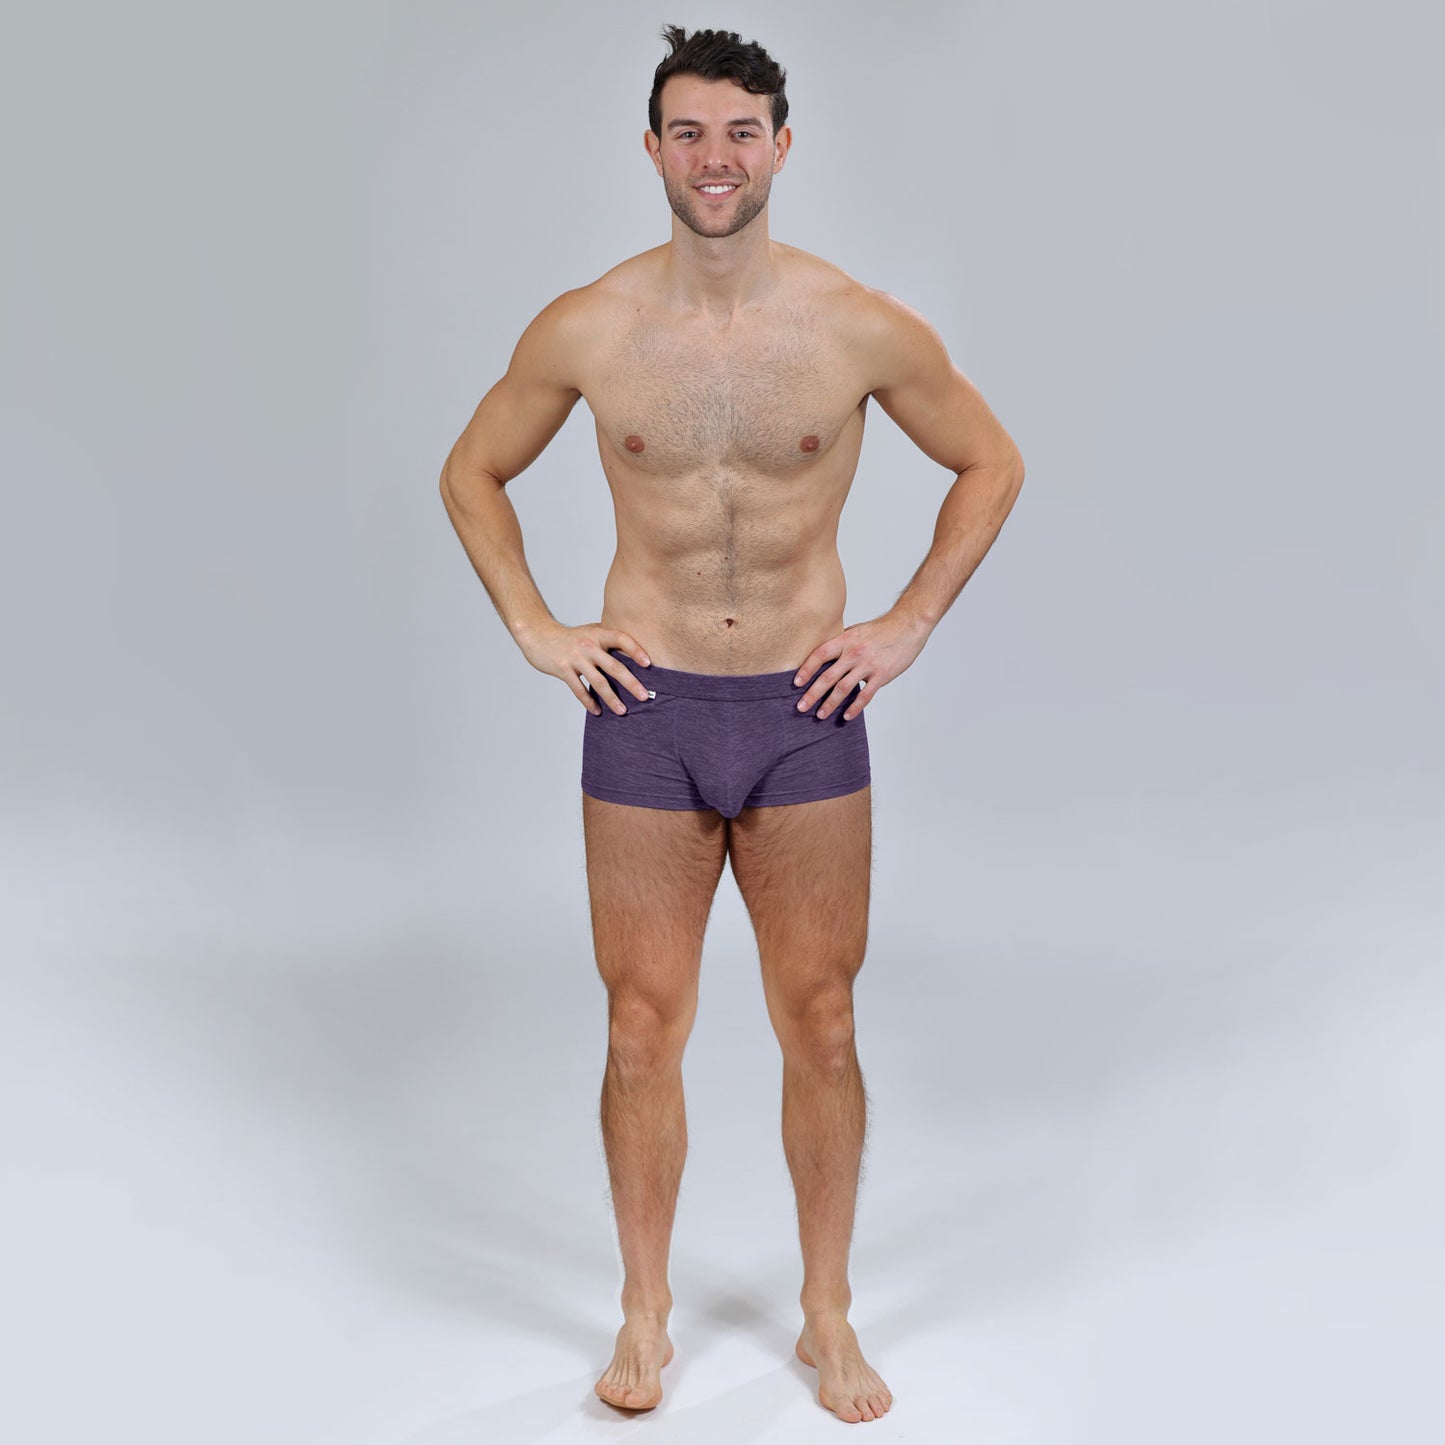 The Limited Edition Acai Purple Trunks for men in the USA and Canada